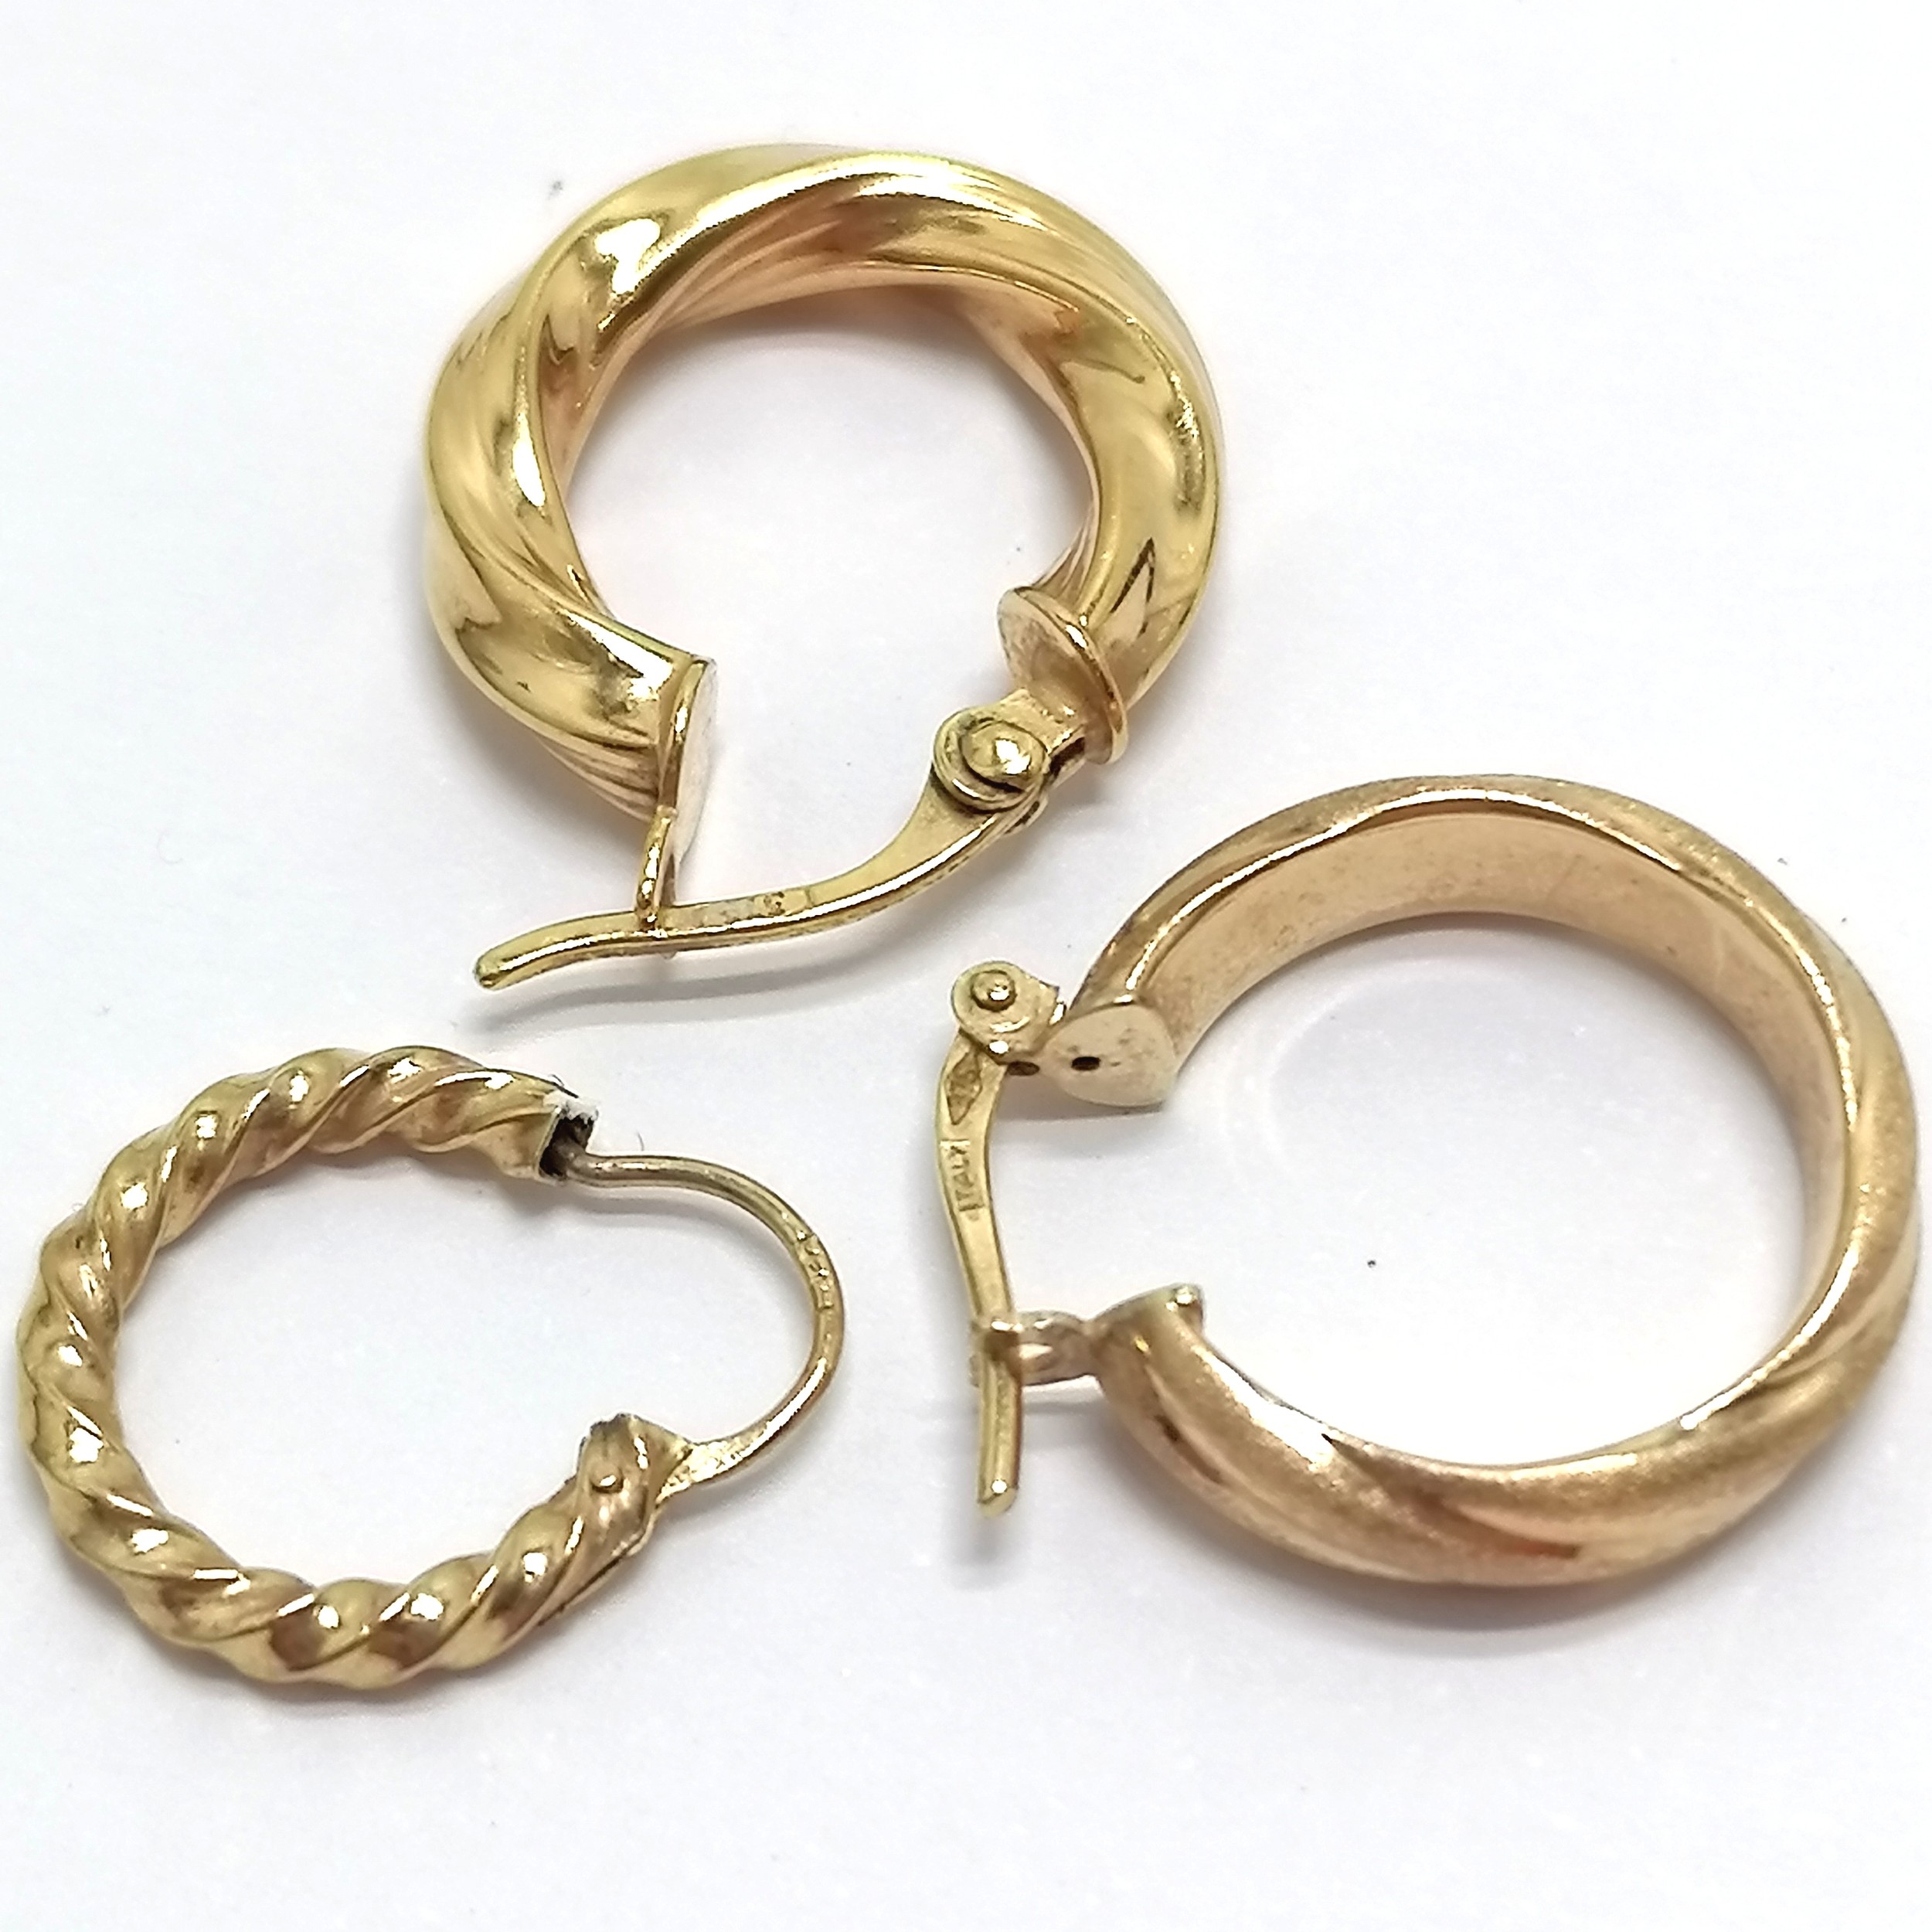 3 x 9ct marked gold pairs of hoop earrings - 4g total - Image 2 of 2